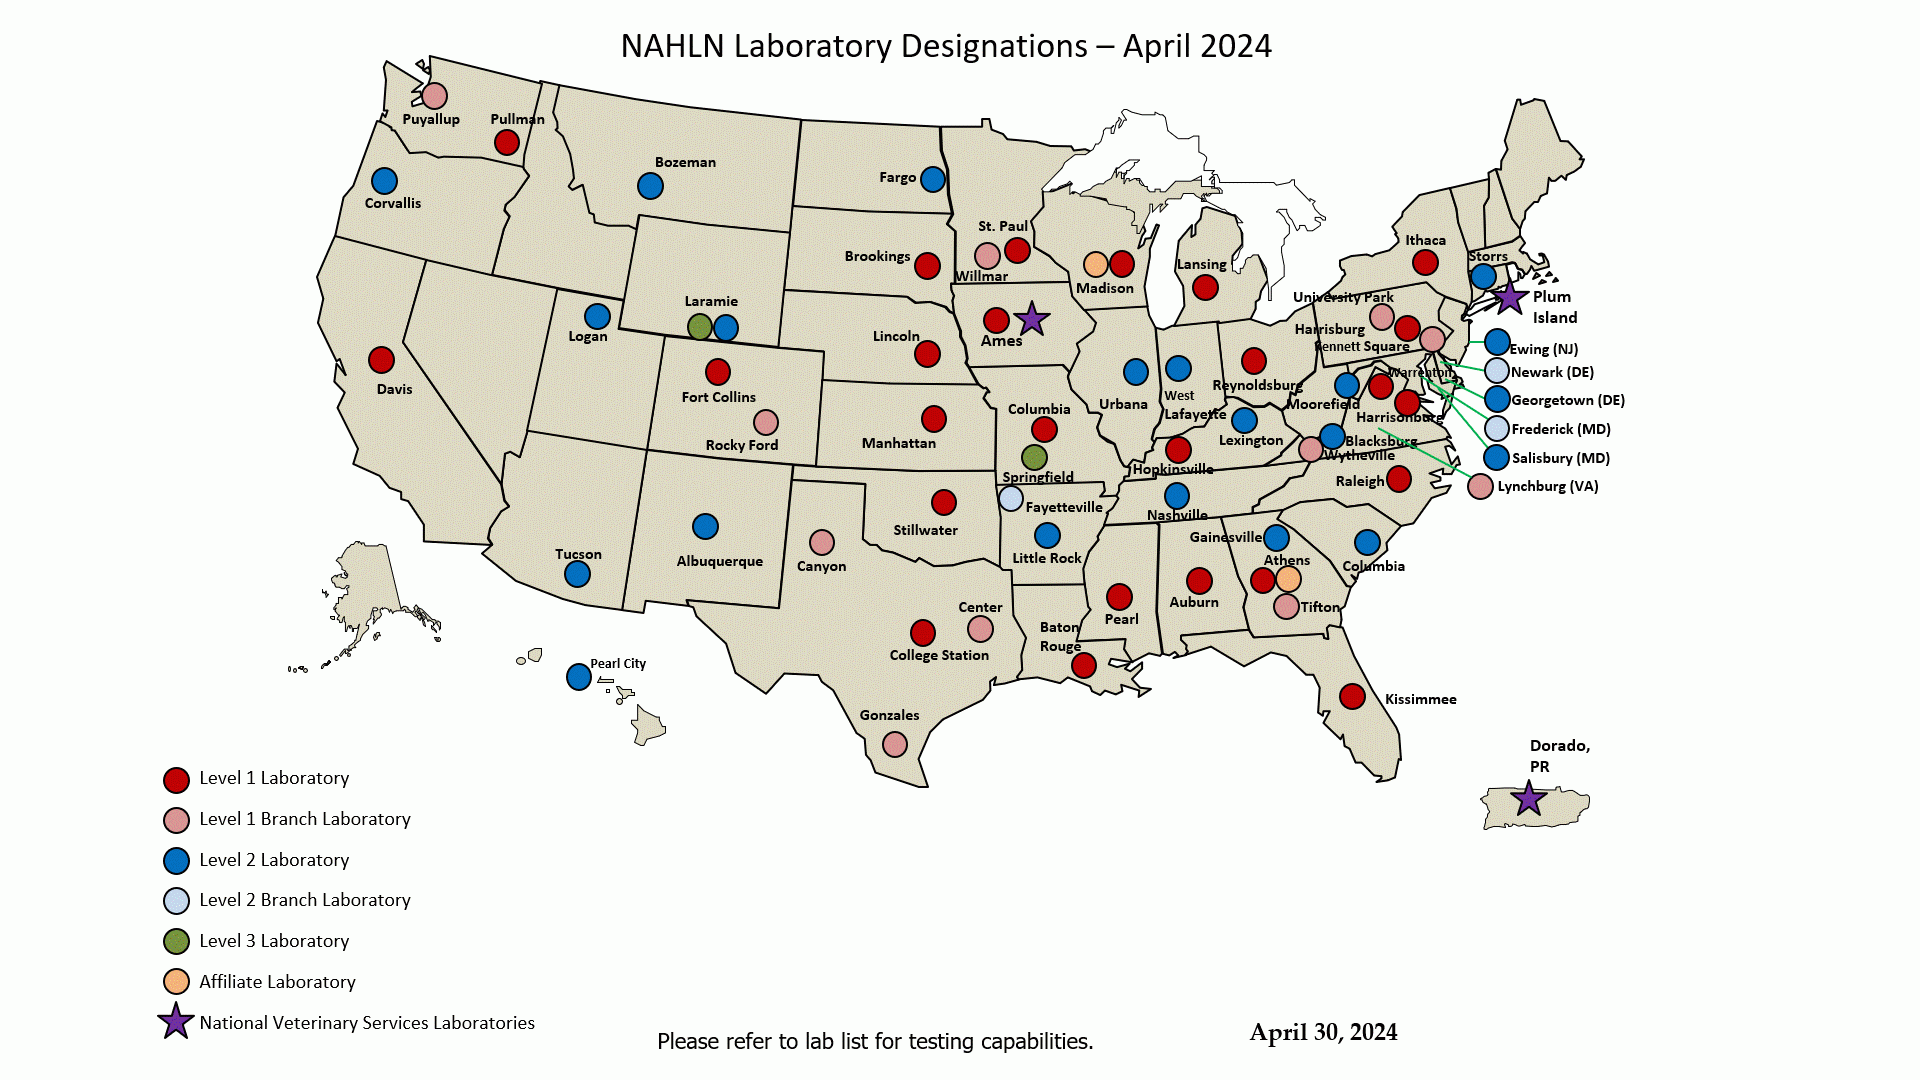 US map showing locations and designations of all NAHLN laboratories